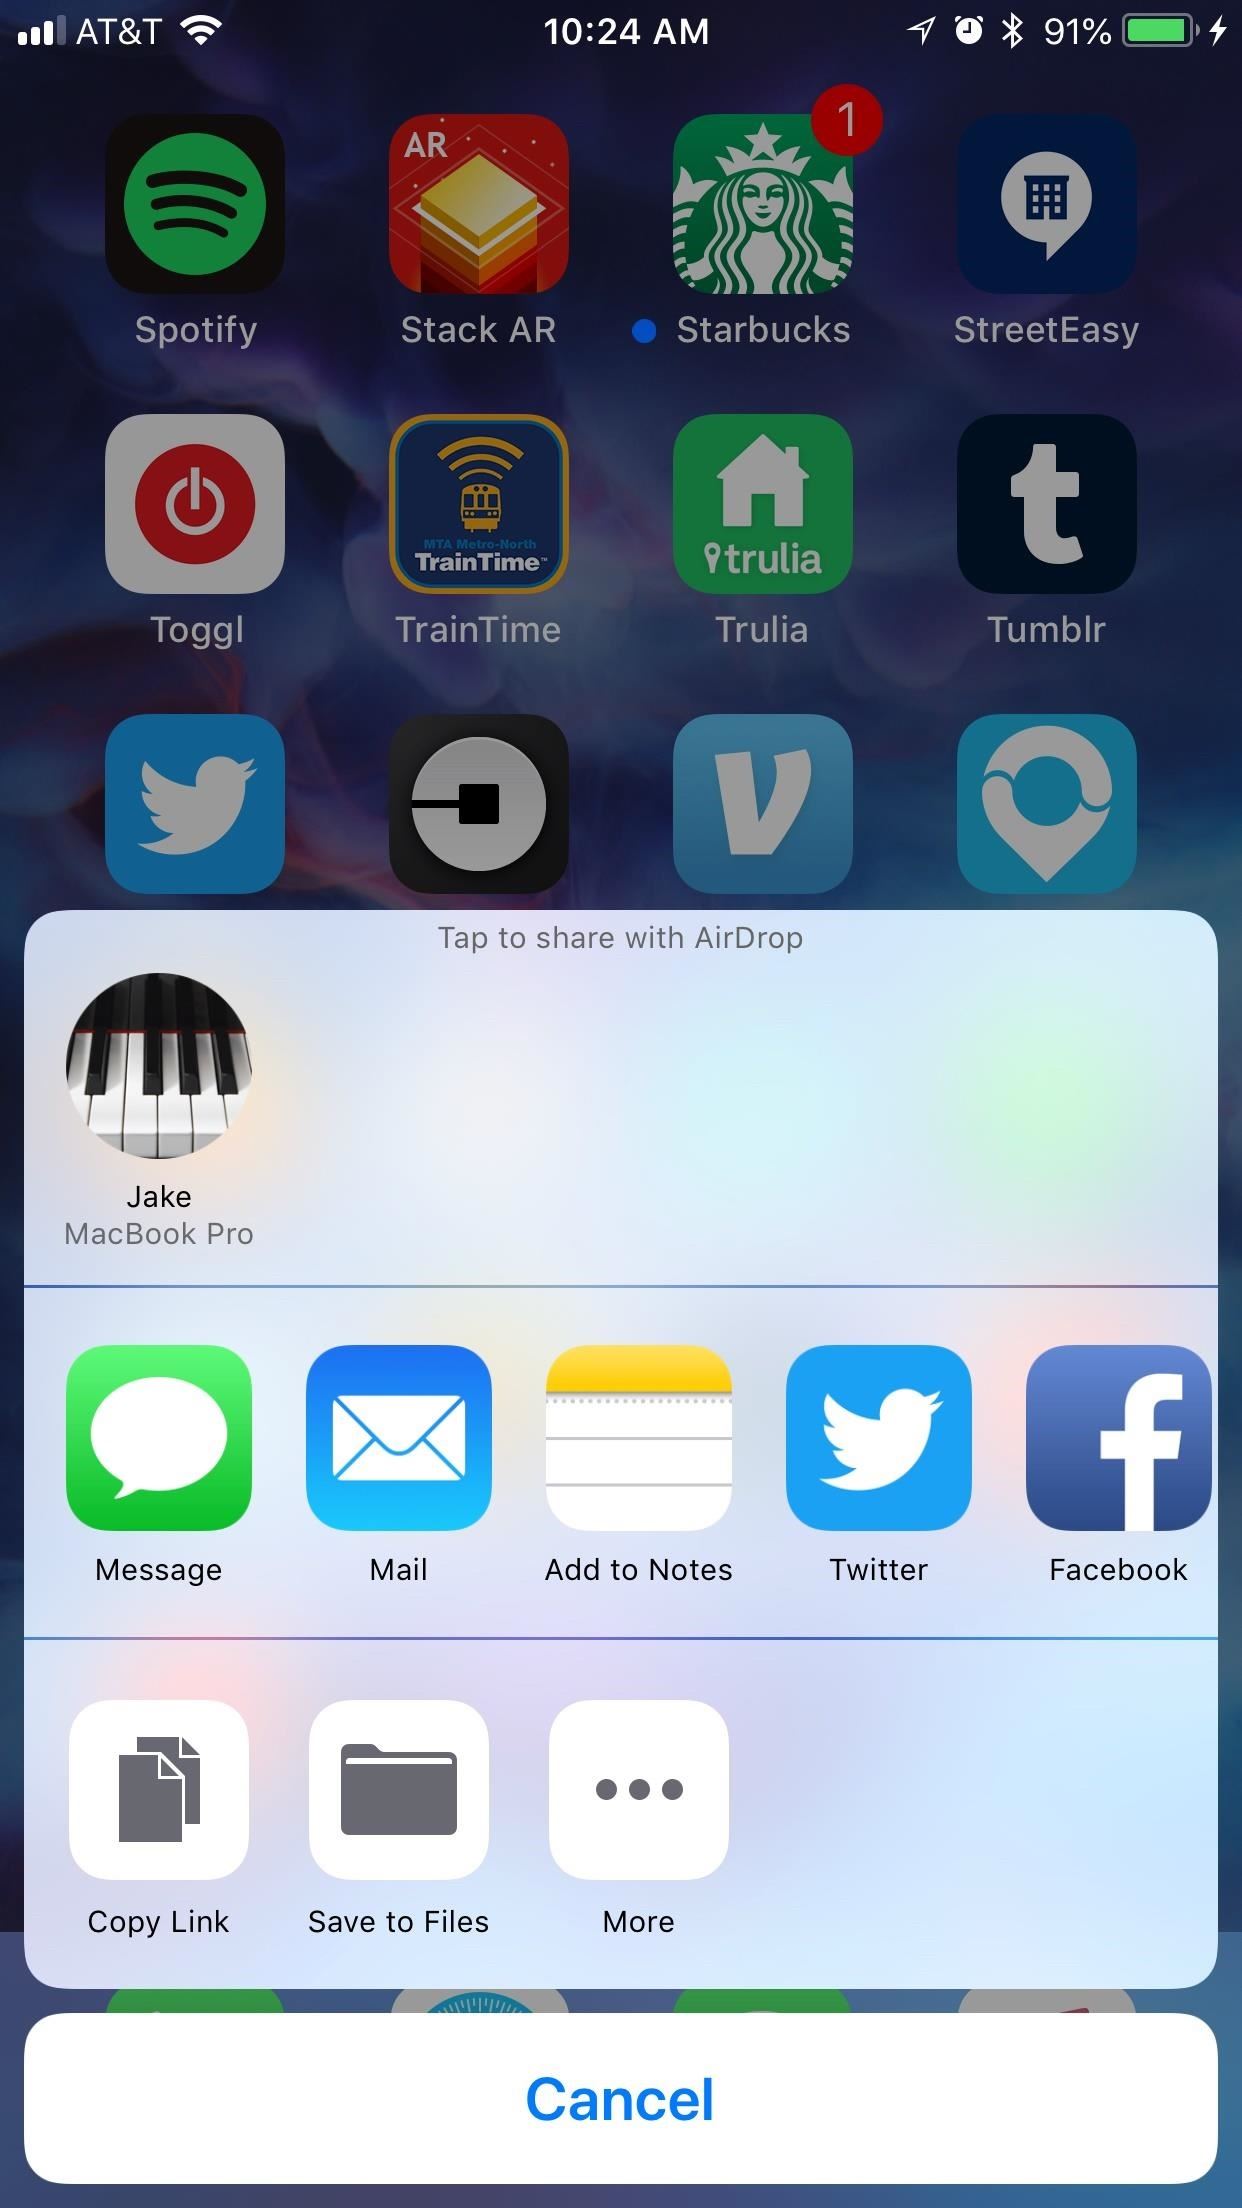 All of the Ways You Can Use 3D Touch on Your iPhone